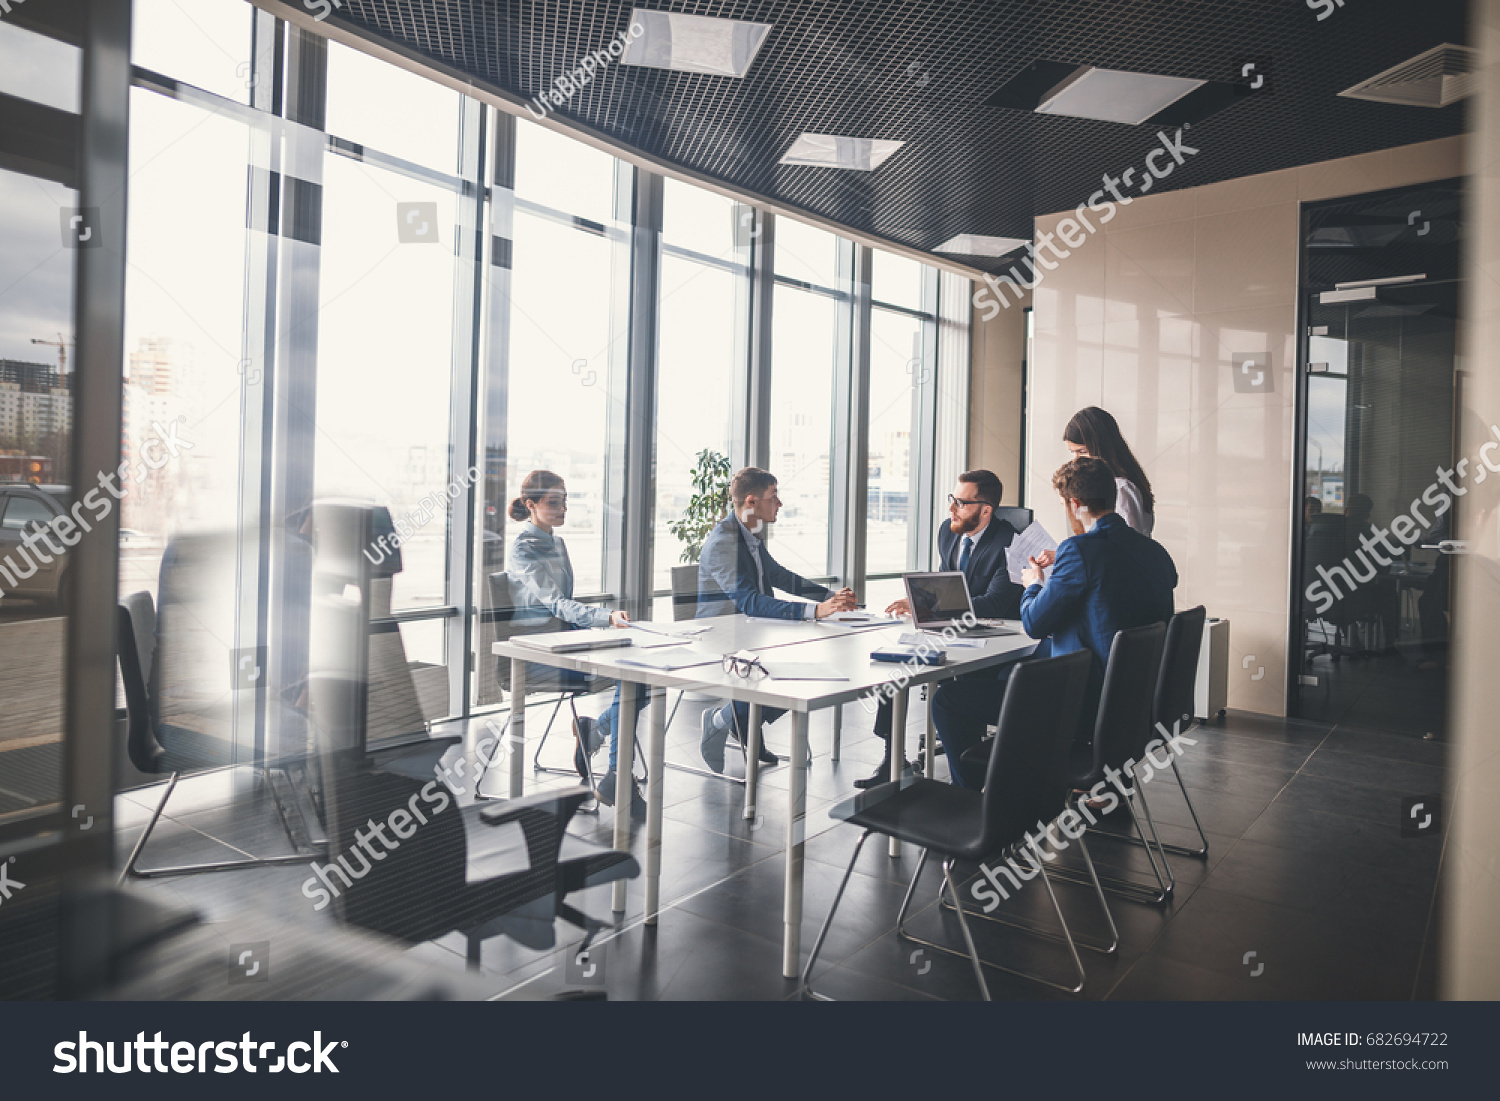 Corporate business team and manager in a meeting #682694722